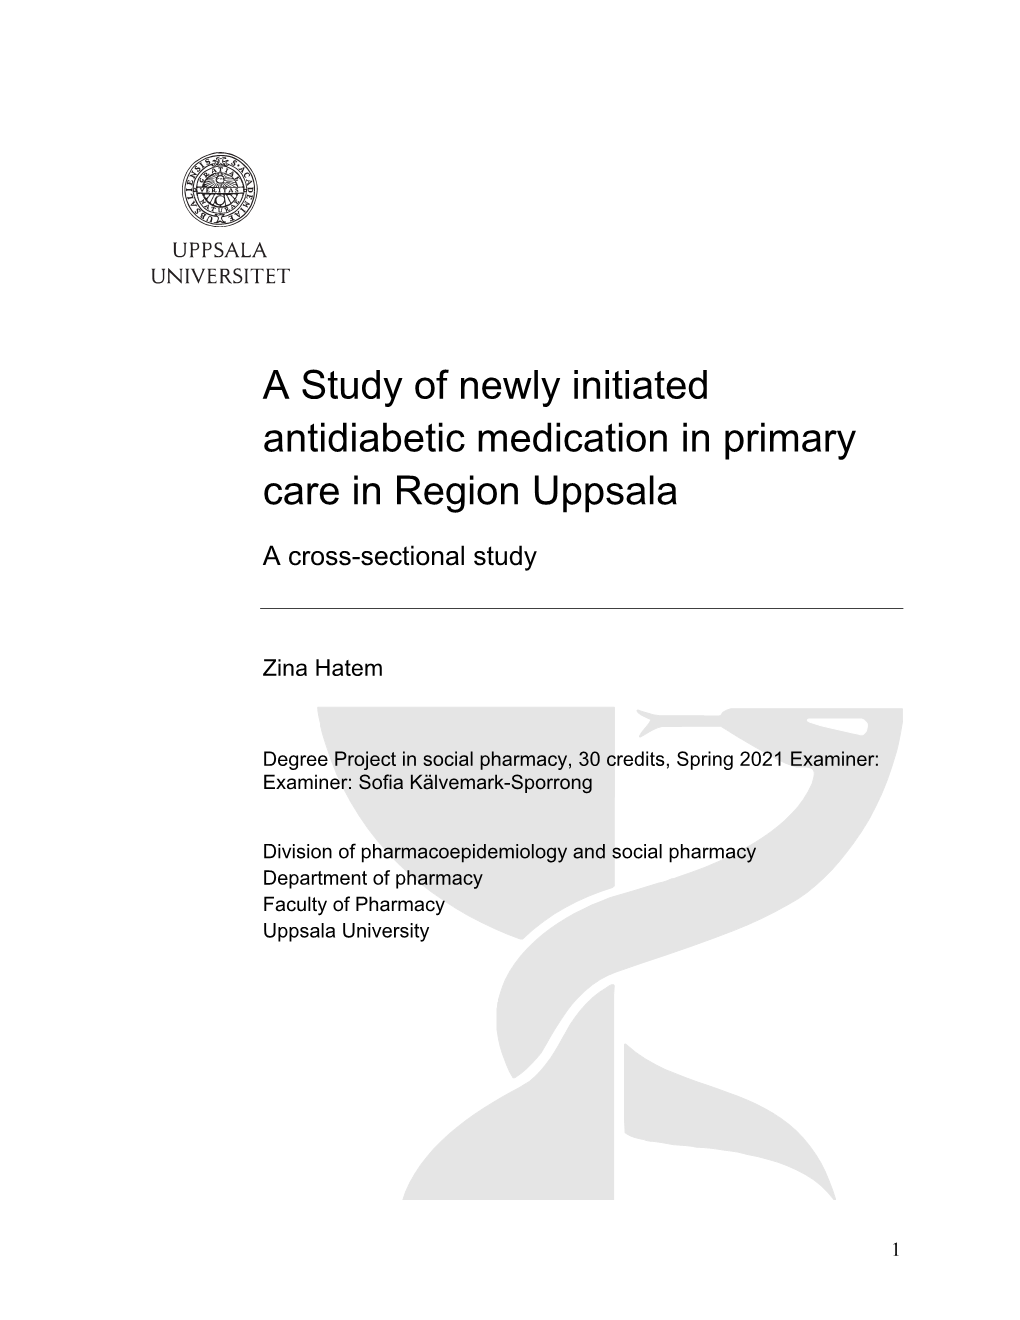 A Study of Newly Initiated Antidiabetic Medication in Primary Care in Region Uppsala